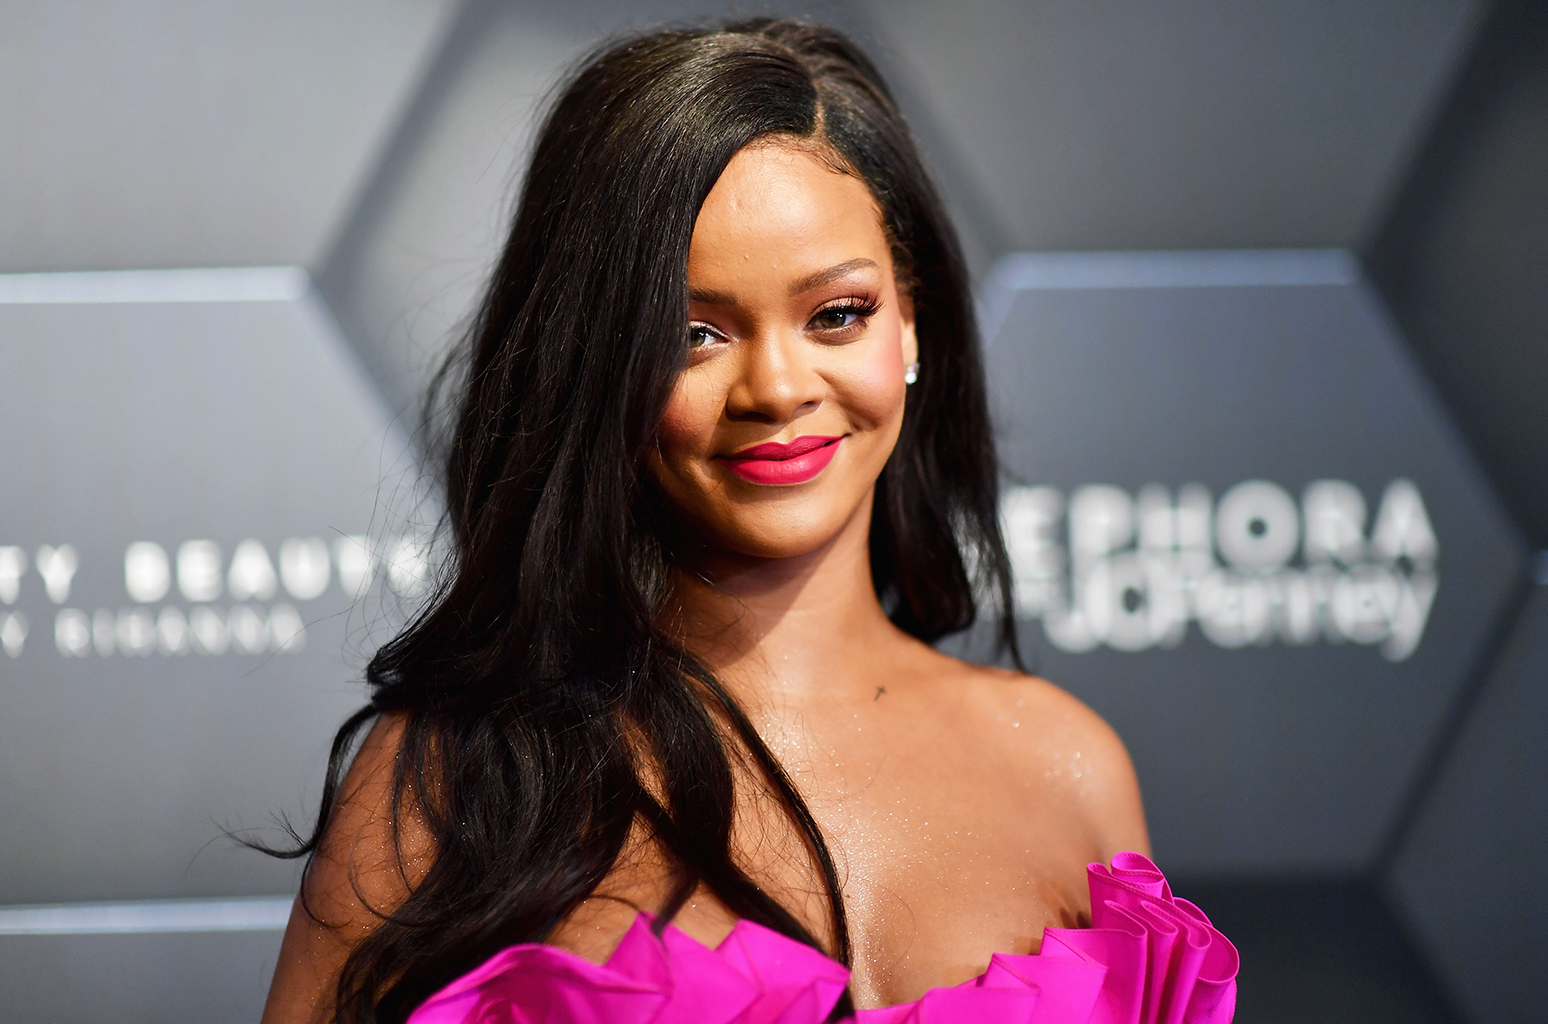 Rihanna seeks to assist citizens in Bahamas